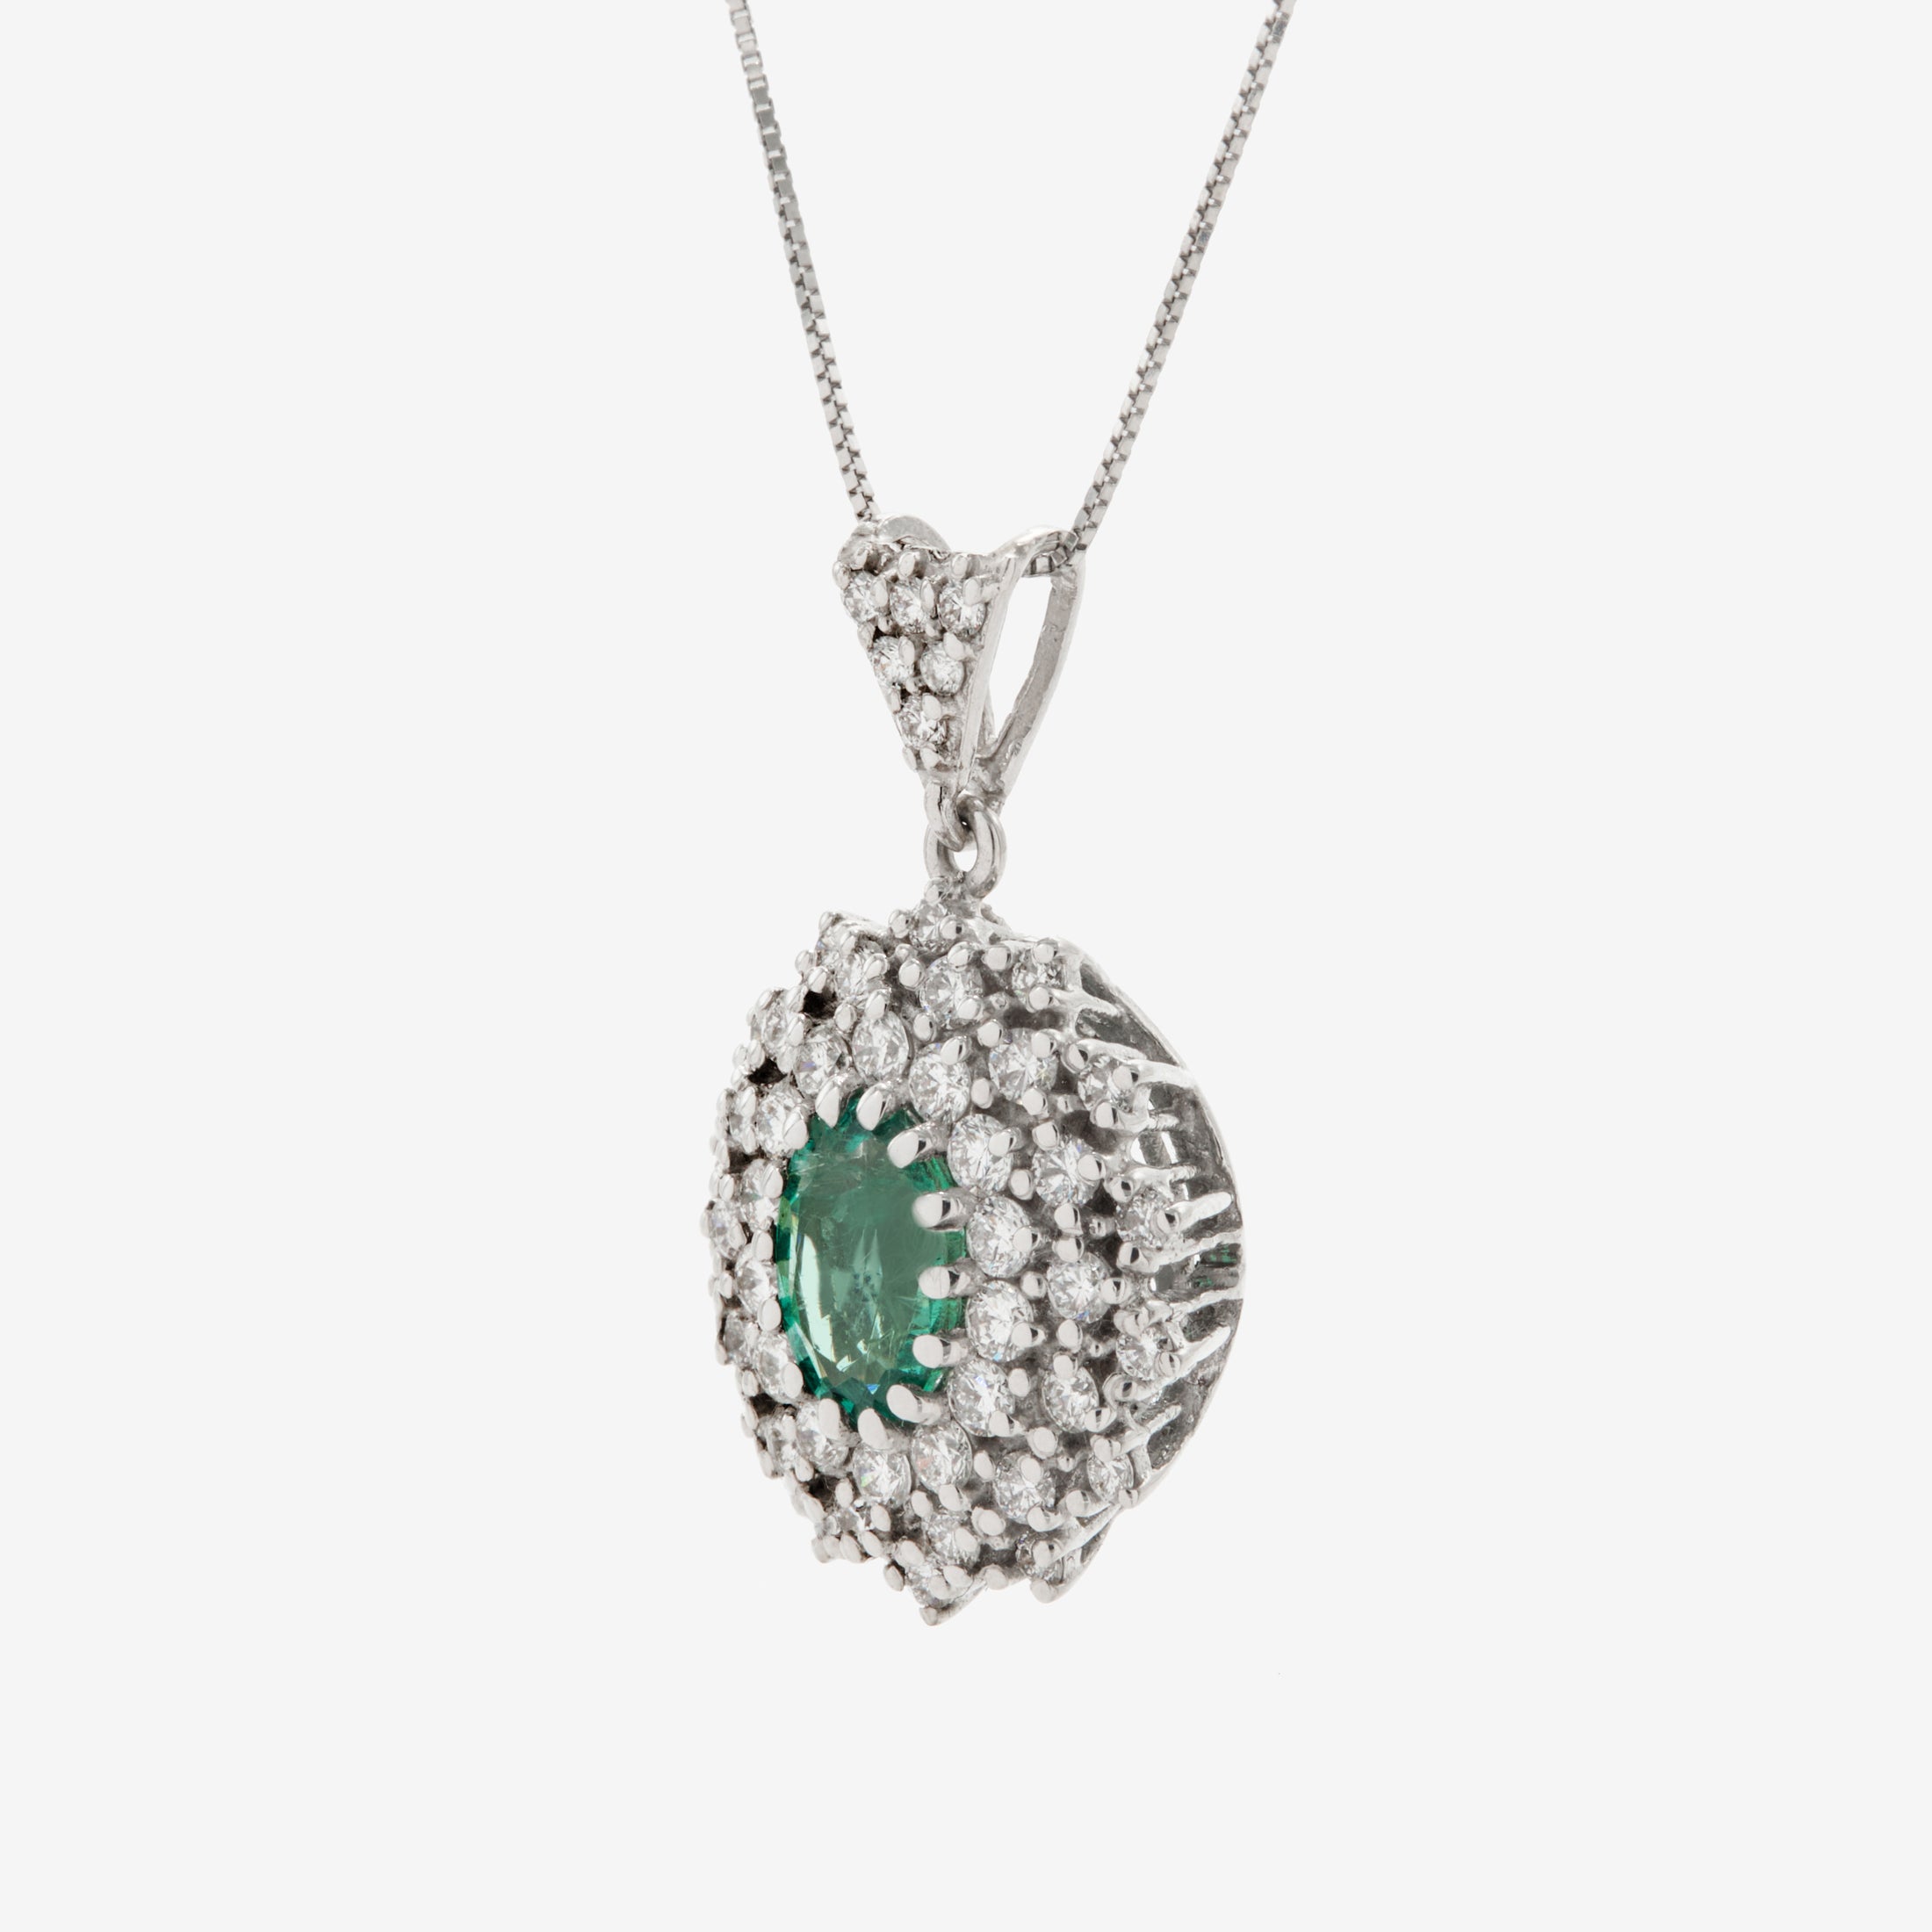 Oval pendant with Emerald